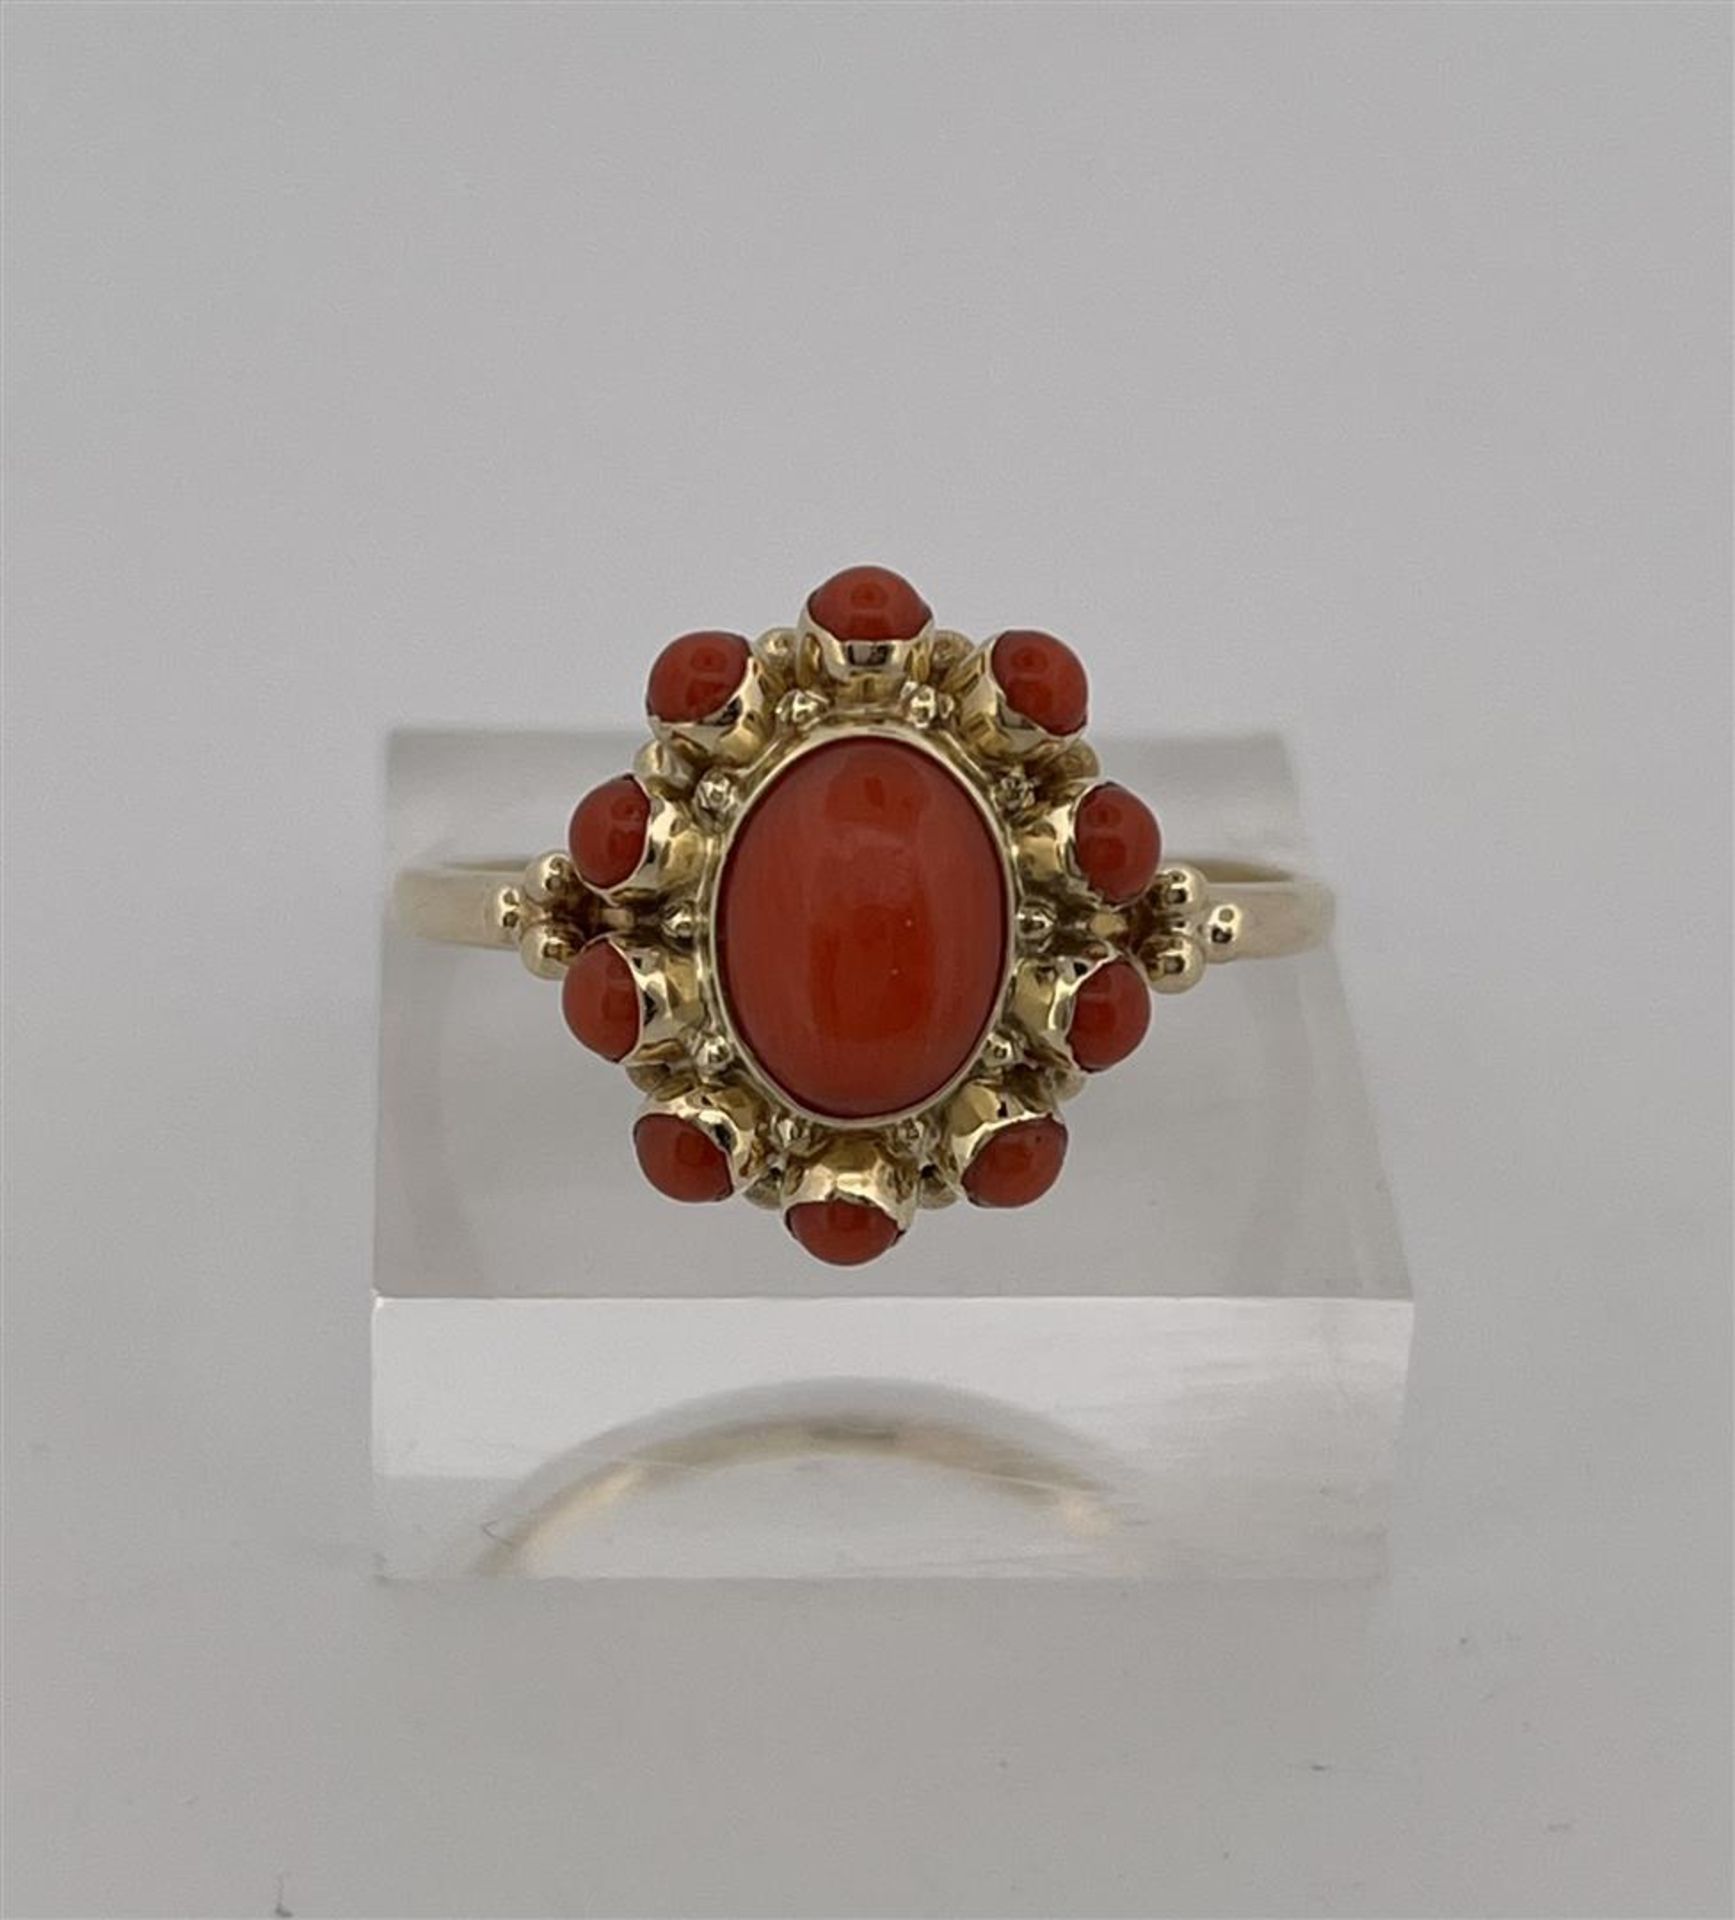 14kt yellow gold rosette ring set with red coral.
The ring is set with 1 central oval cabochon cut r